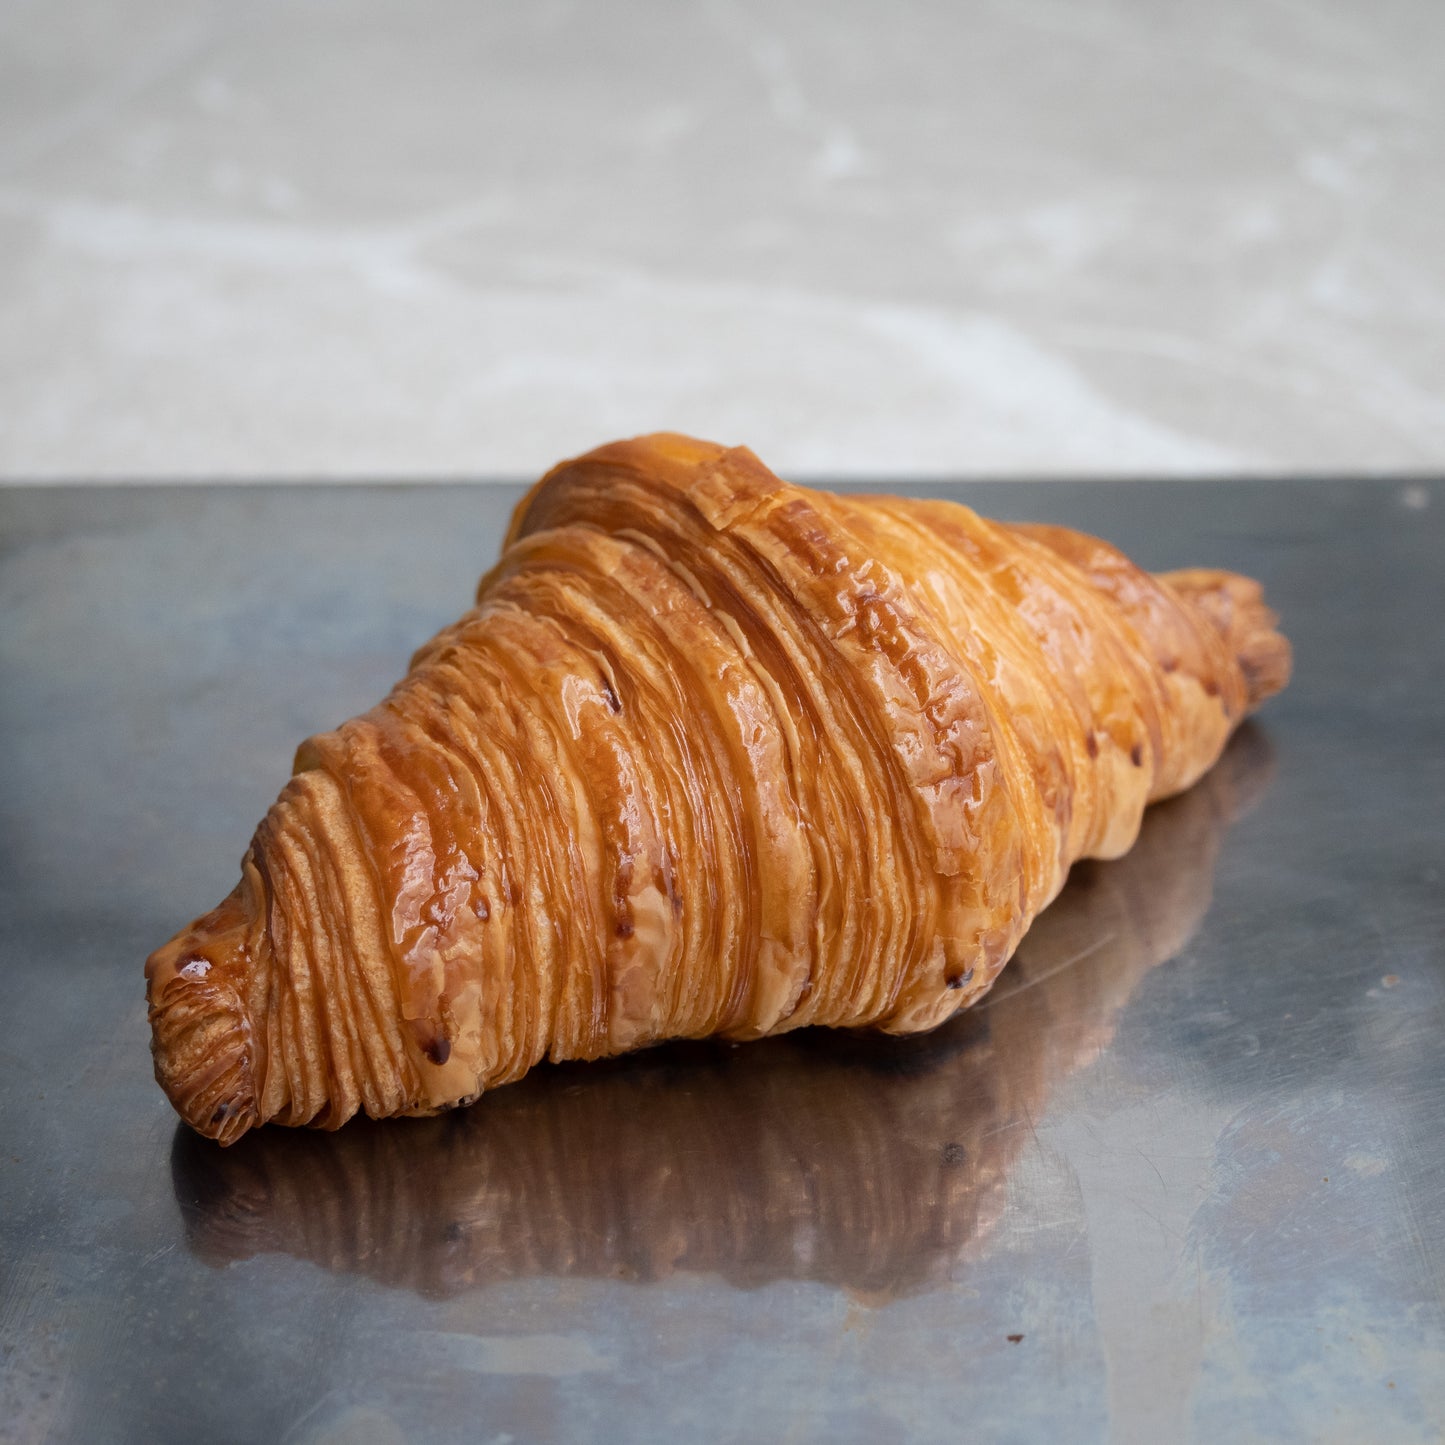 Freshly baked croissant made with the finest AOP butter for a rich, buttery taste and flaky texture.